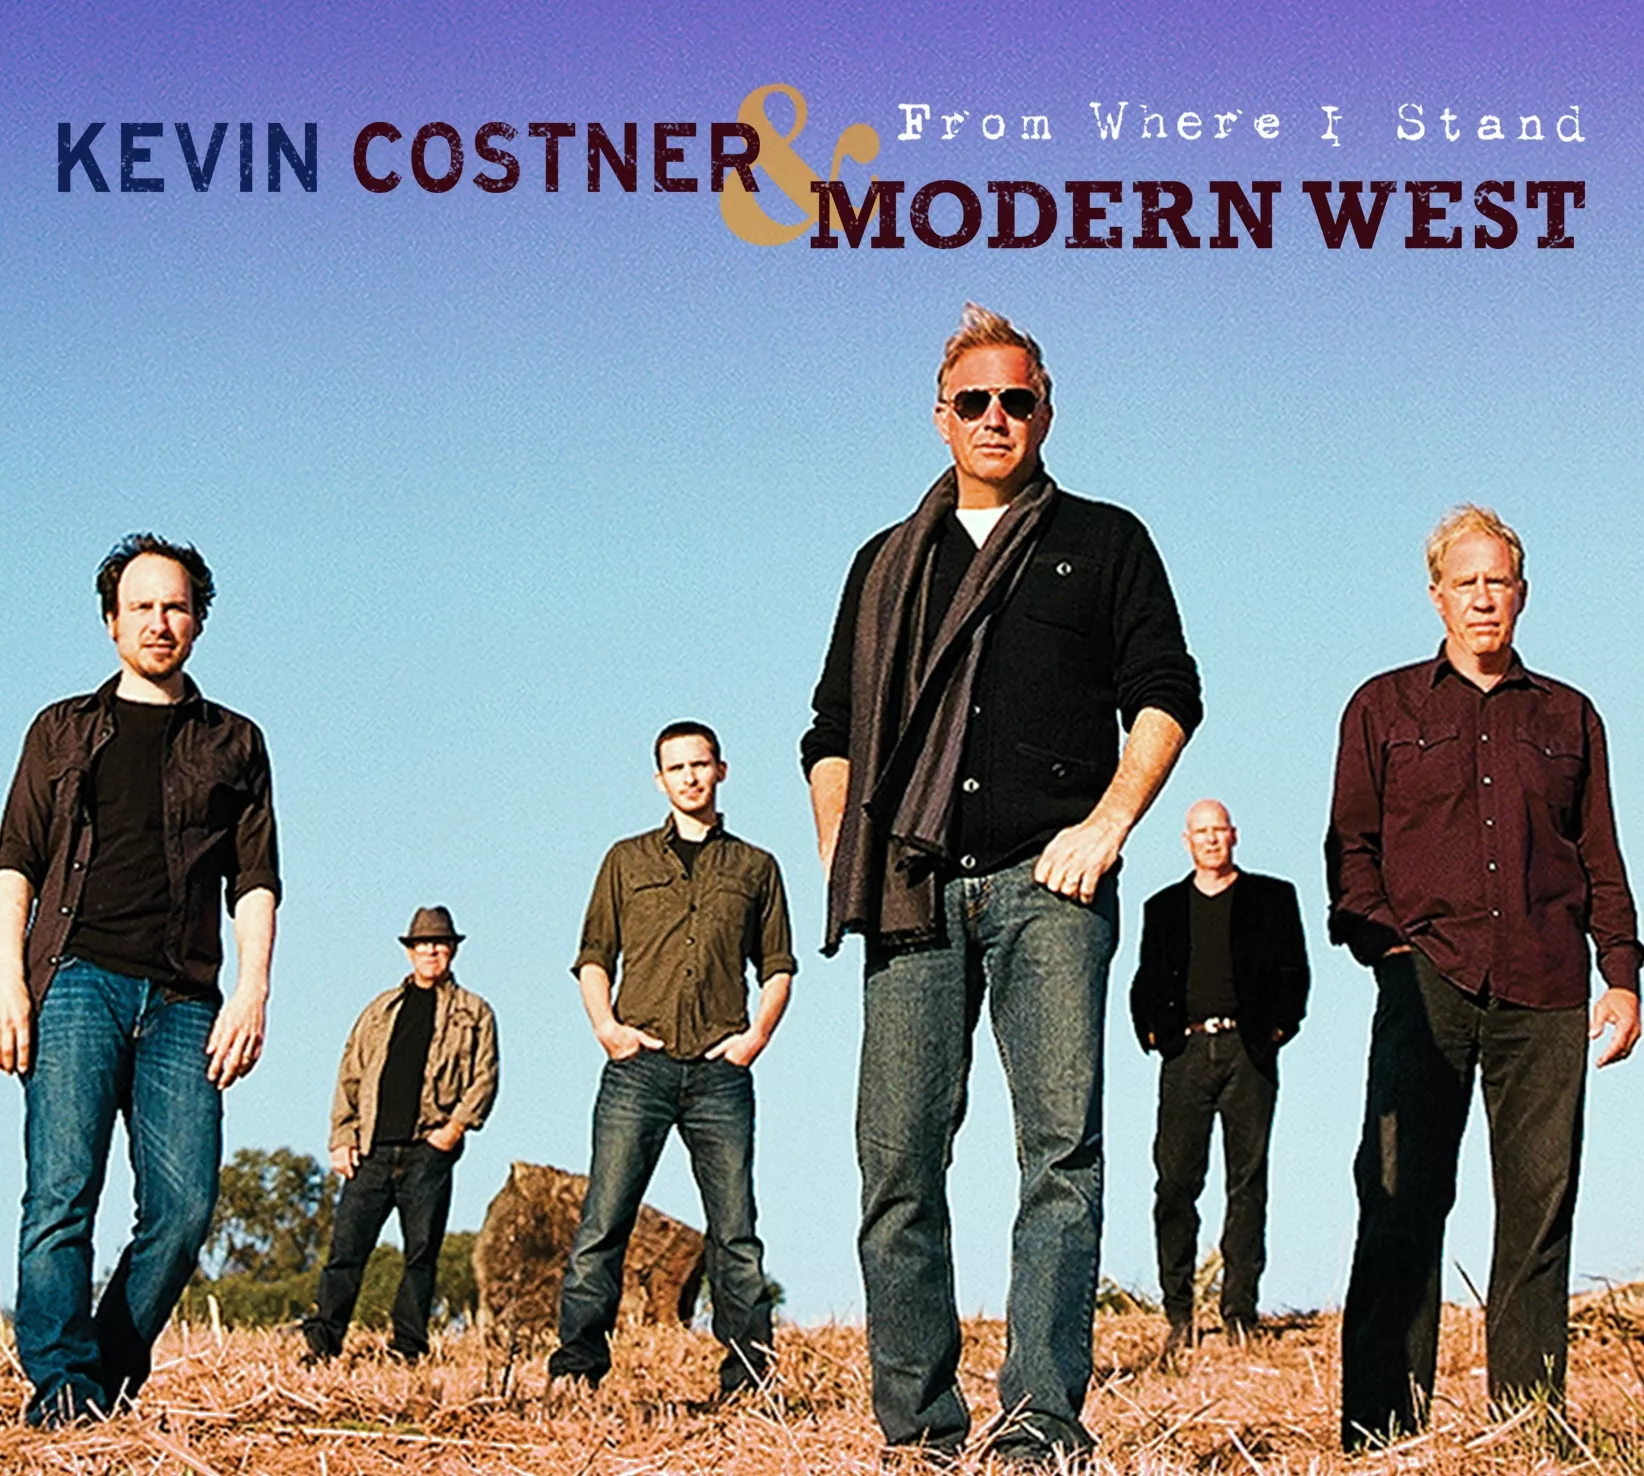 From Where I Stand - Kevin Costner And Modern West